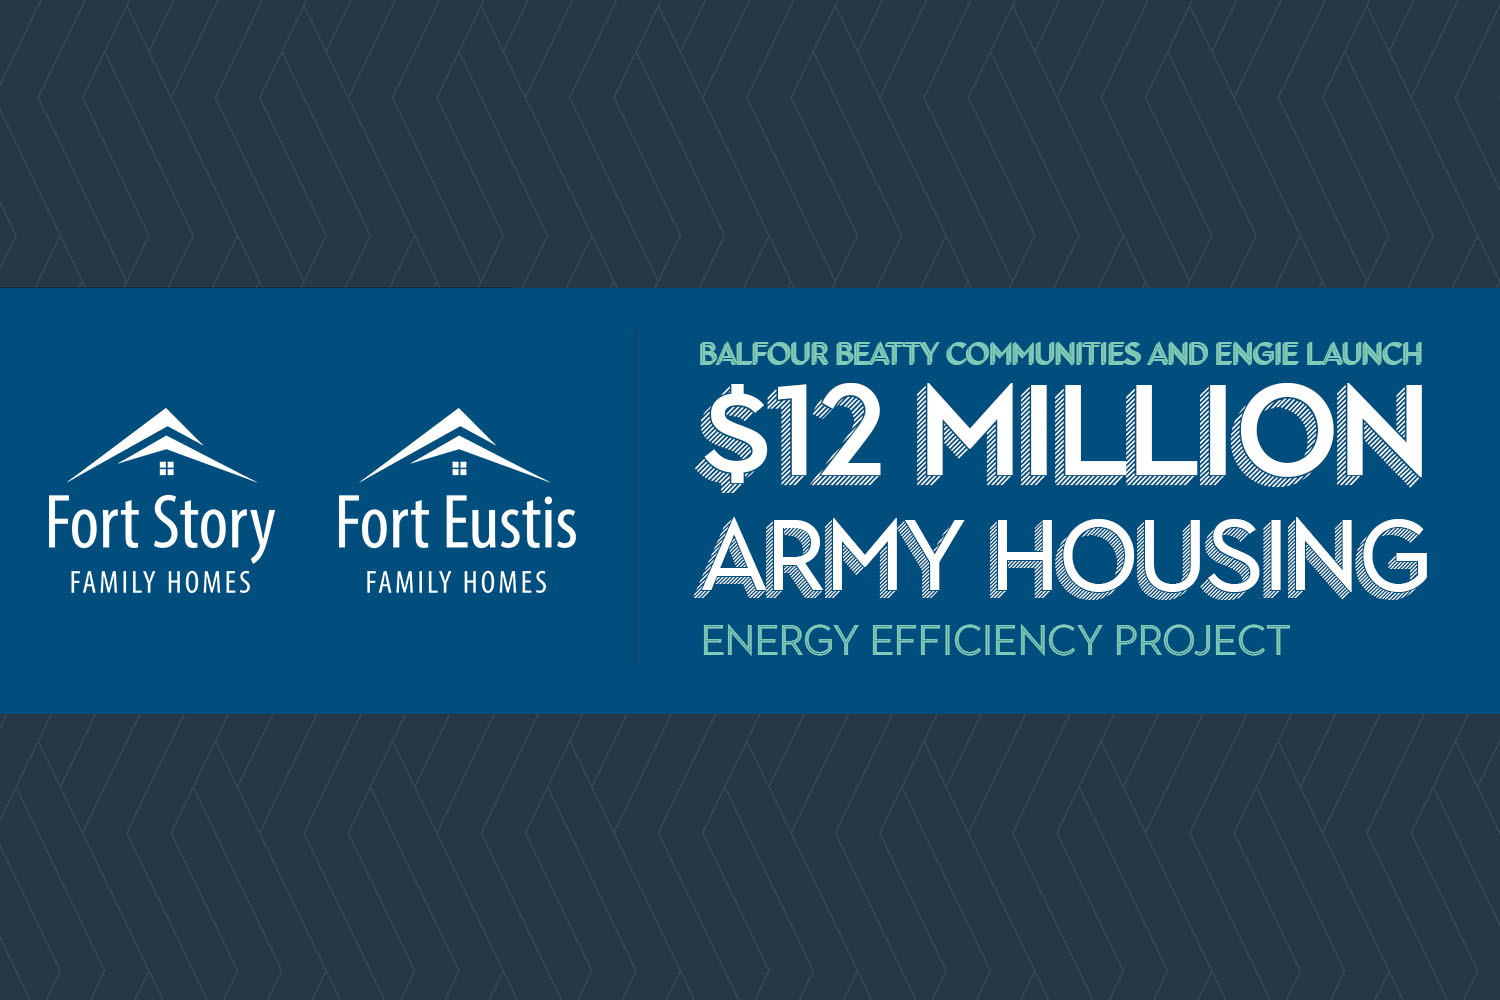 Balfour Beatty Communities and ENGIE Launch  $12 Million Army Housing Energy Efficiency Project